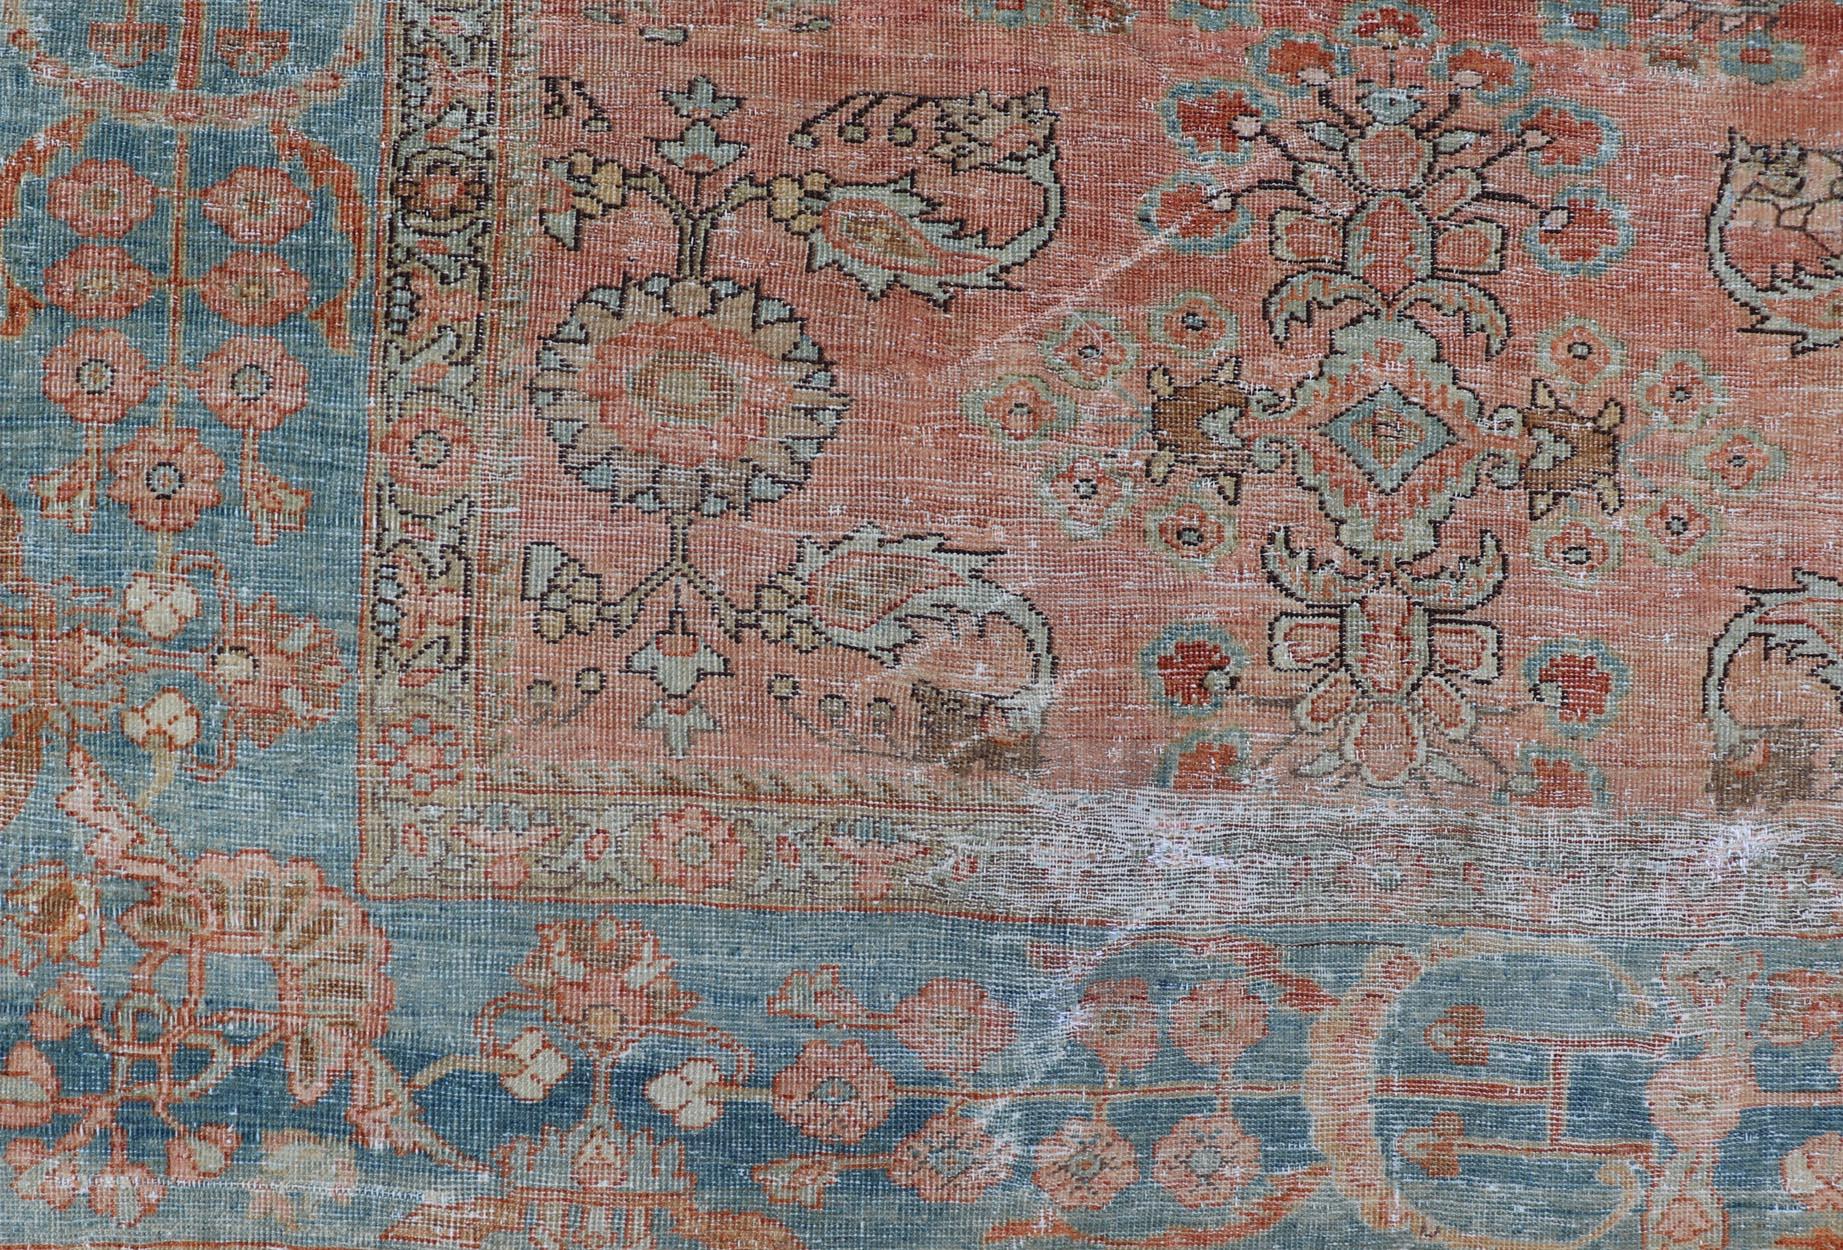 Antique Persian Muted Colored Sultanabad Mahal Rug with All Over Floral Design. Antique Mahal Sultanabad. Keivan Woven Arts; rug R20-1014, country of origin / type: Iran / Mahal, circa 1910.
Measures: 9'2 x 11'11
This Antique Persian Sultanabad